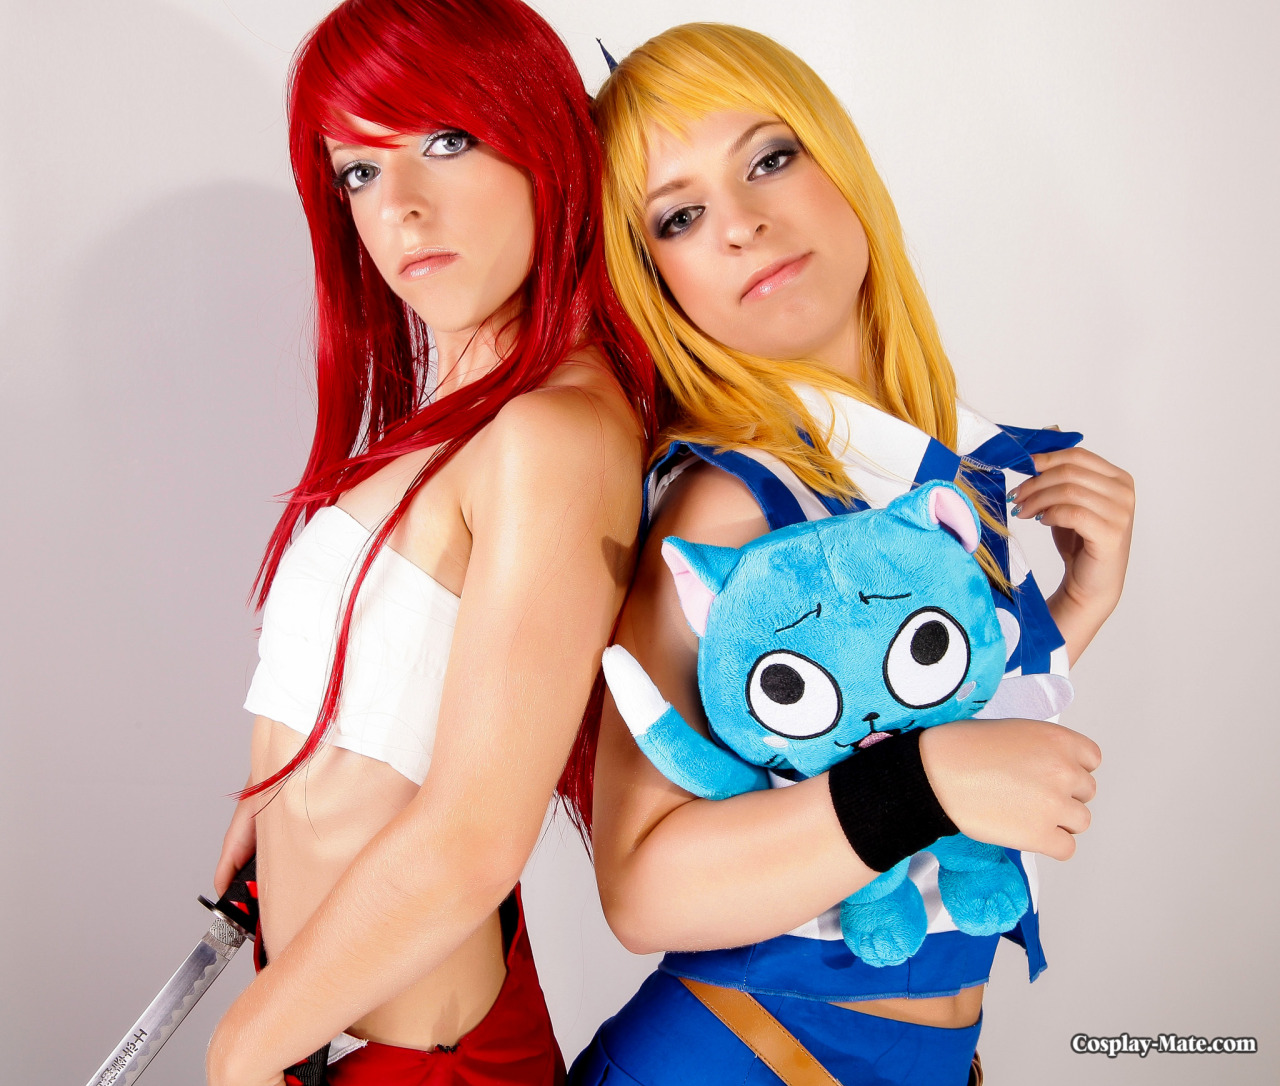 Lucy et Erza together, the models are sister. I&rsquo;m starting to work a the